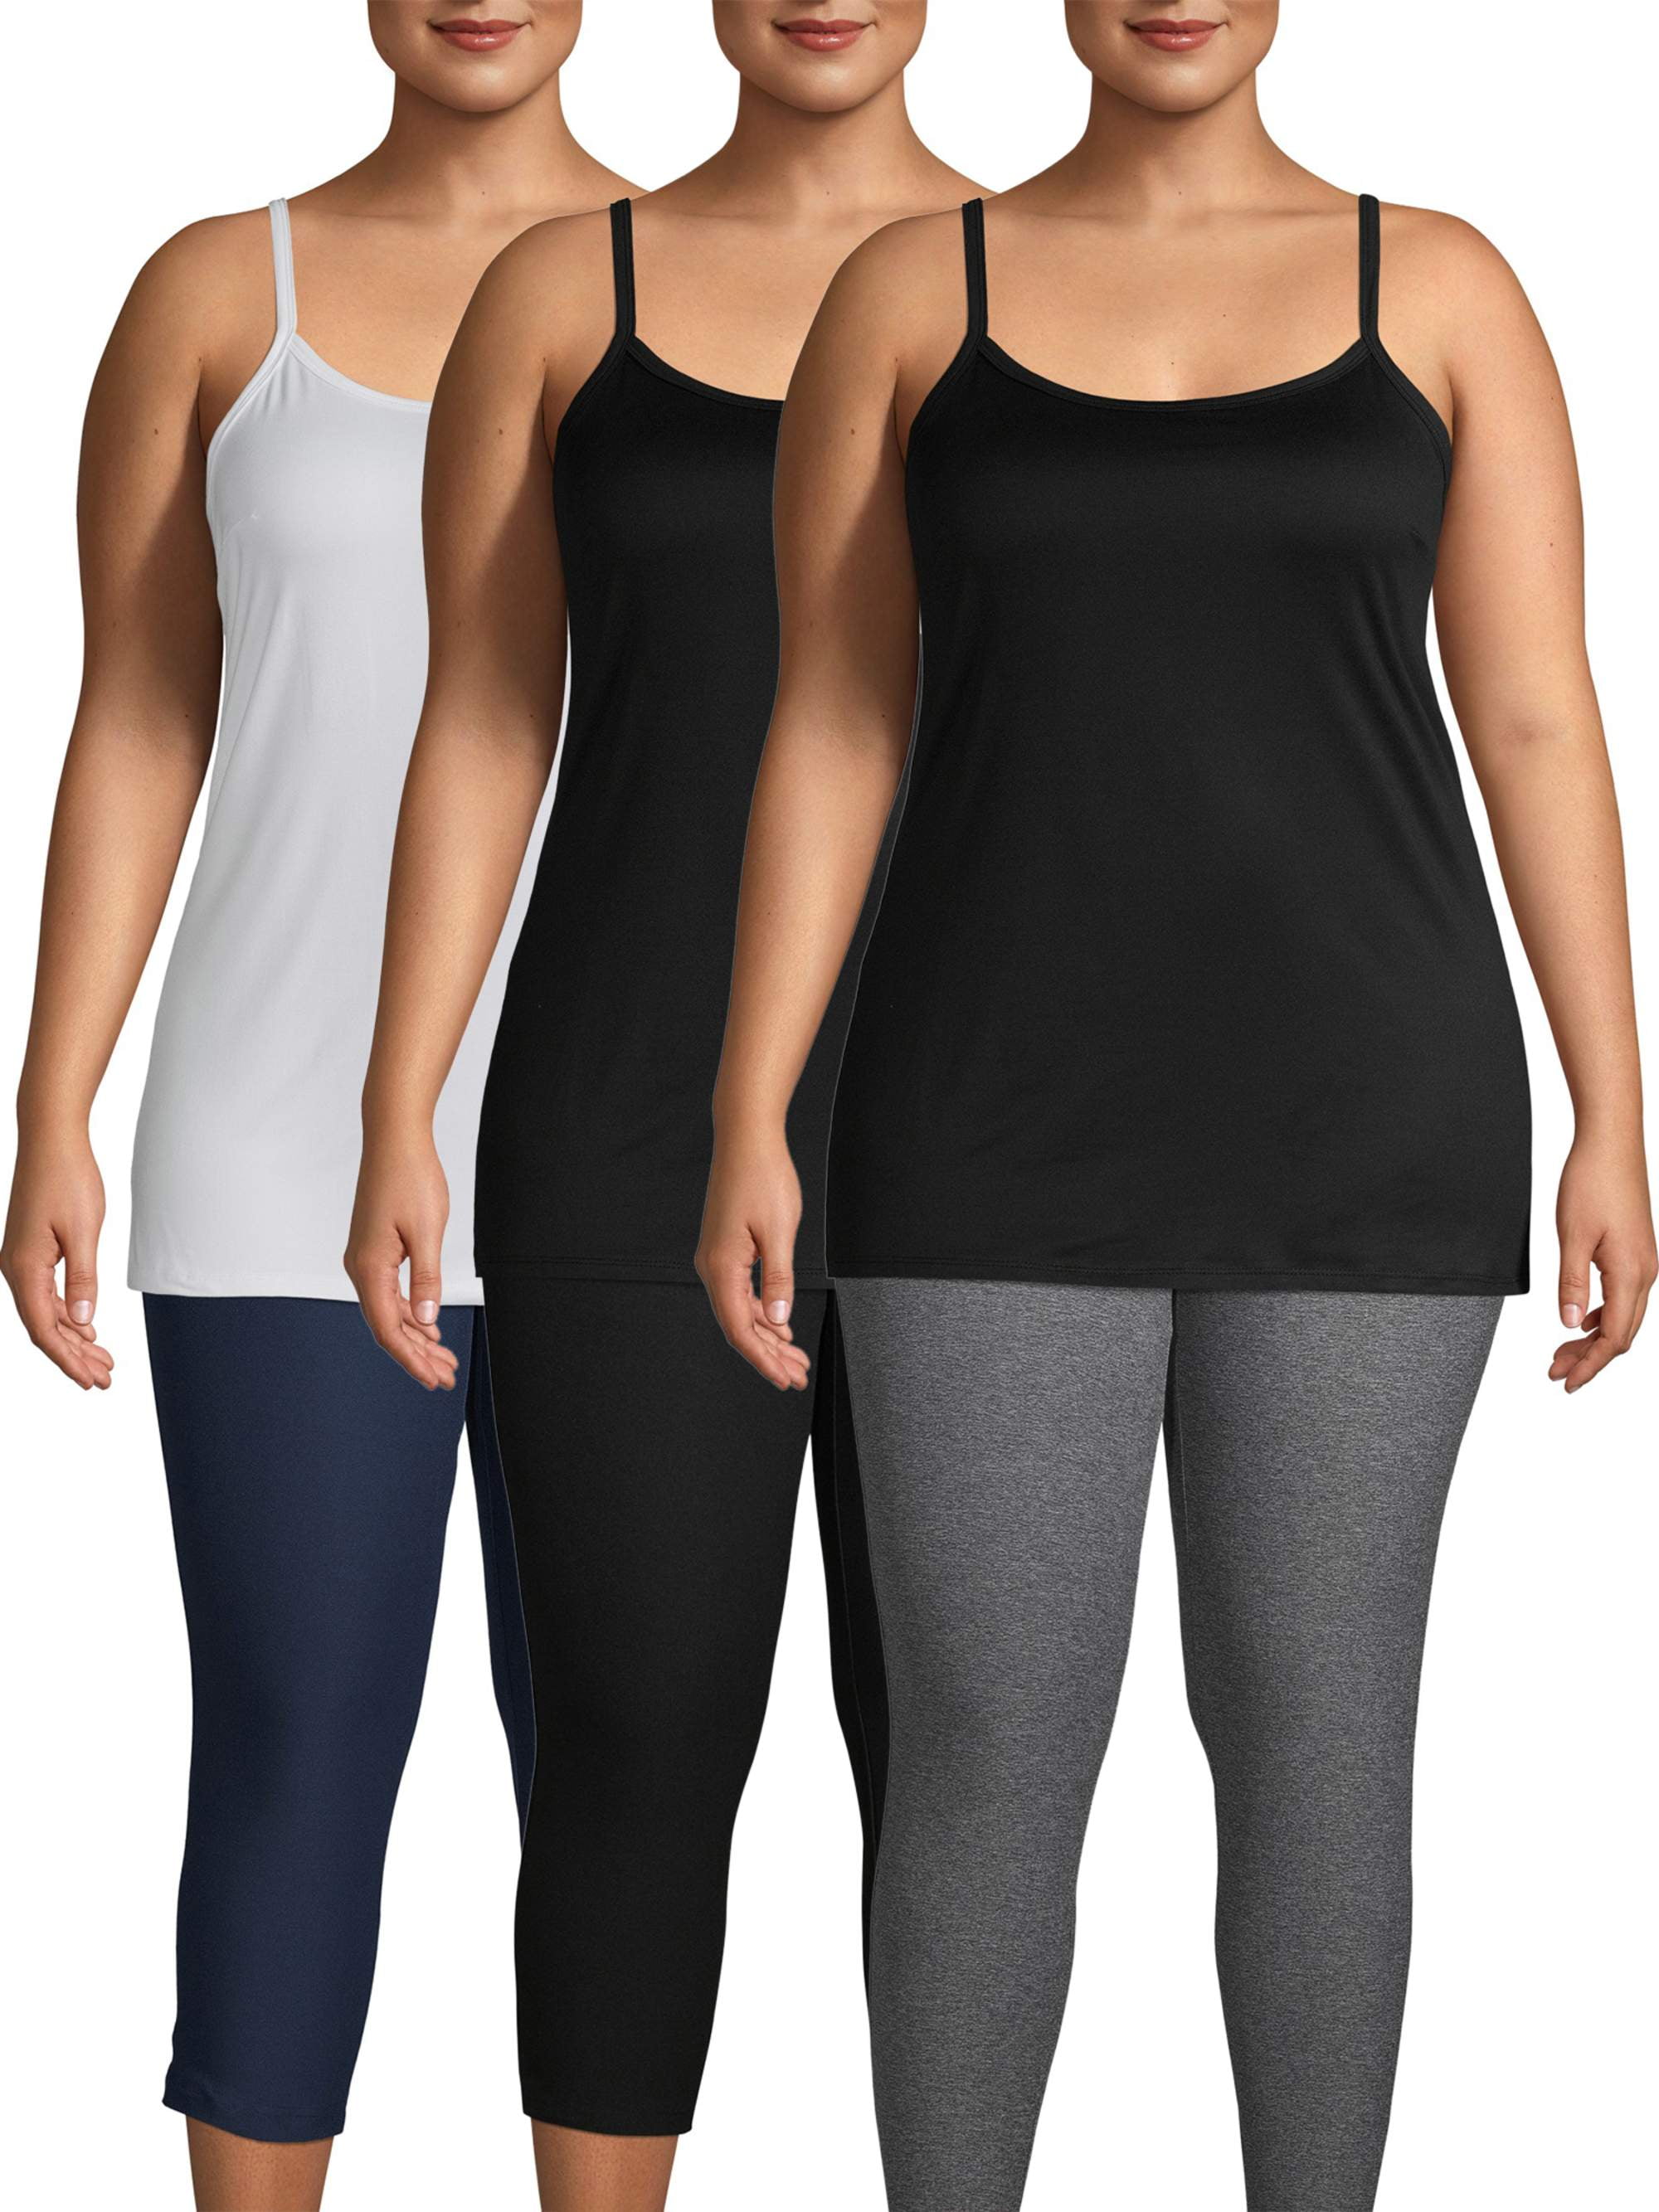 Terra & Sky Women's Pants On Sale Up To 90% Off Retail